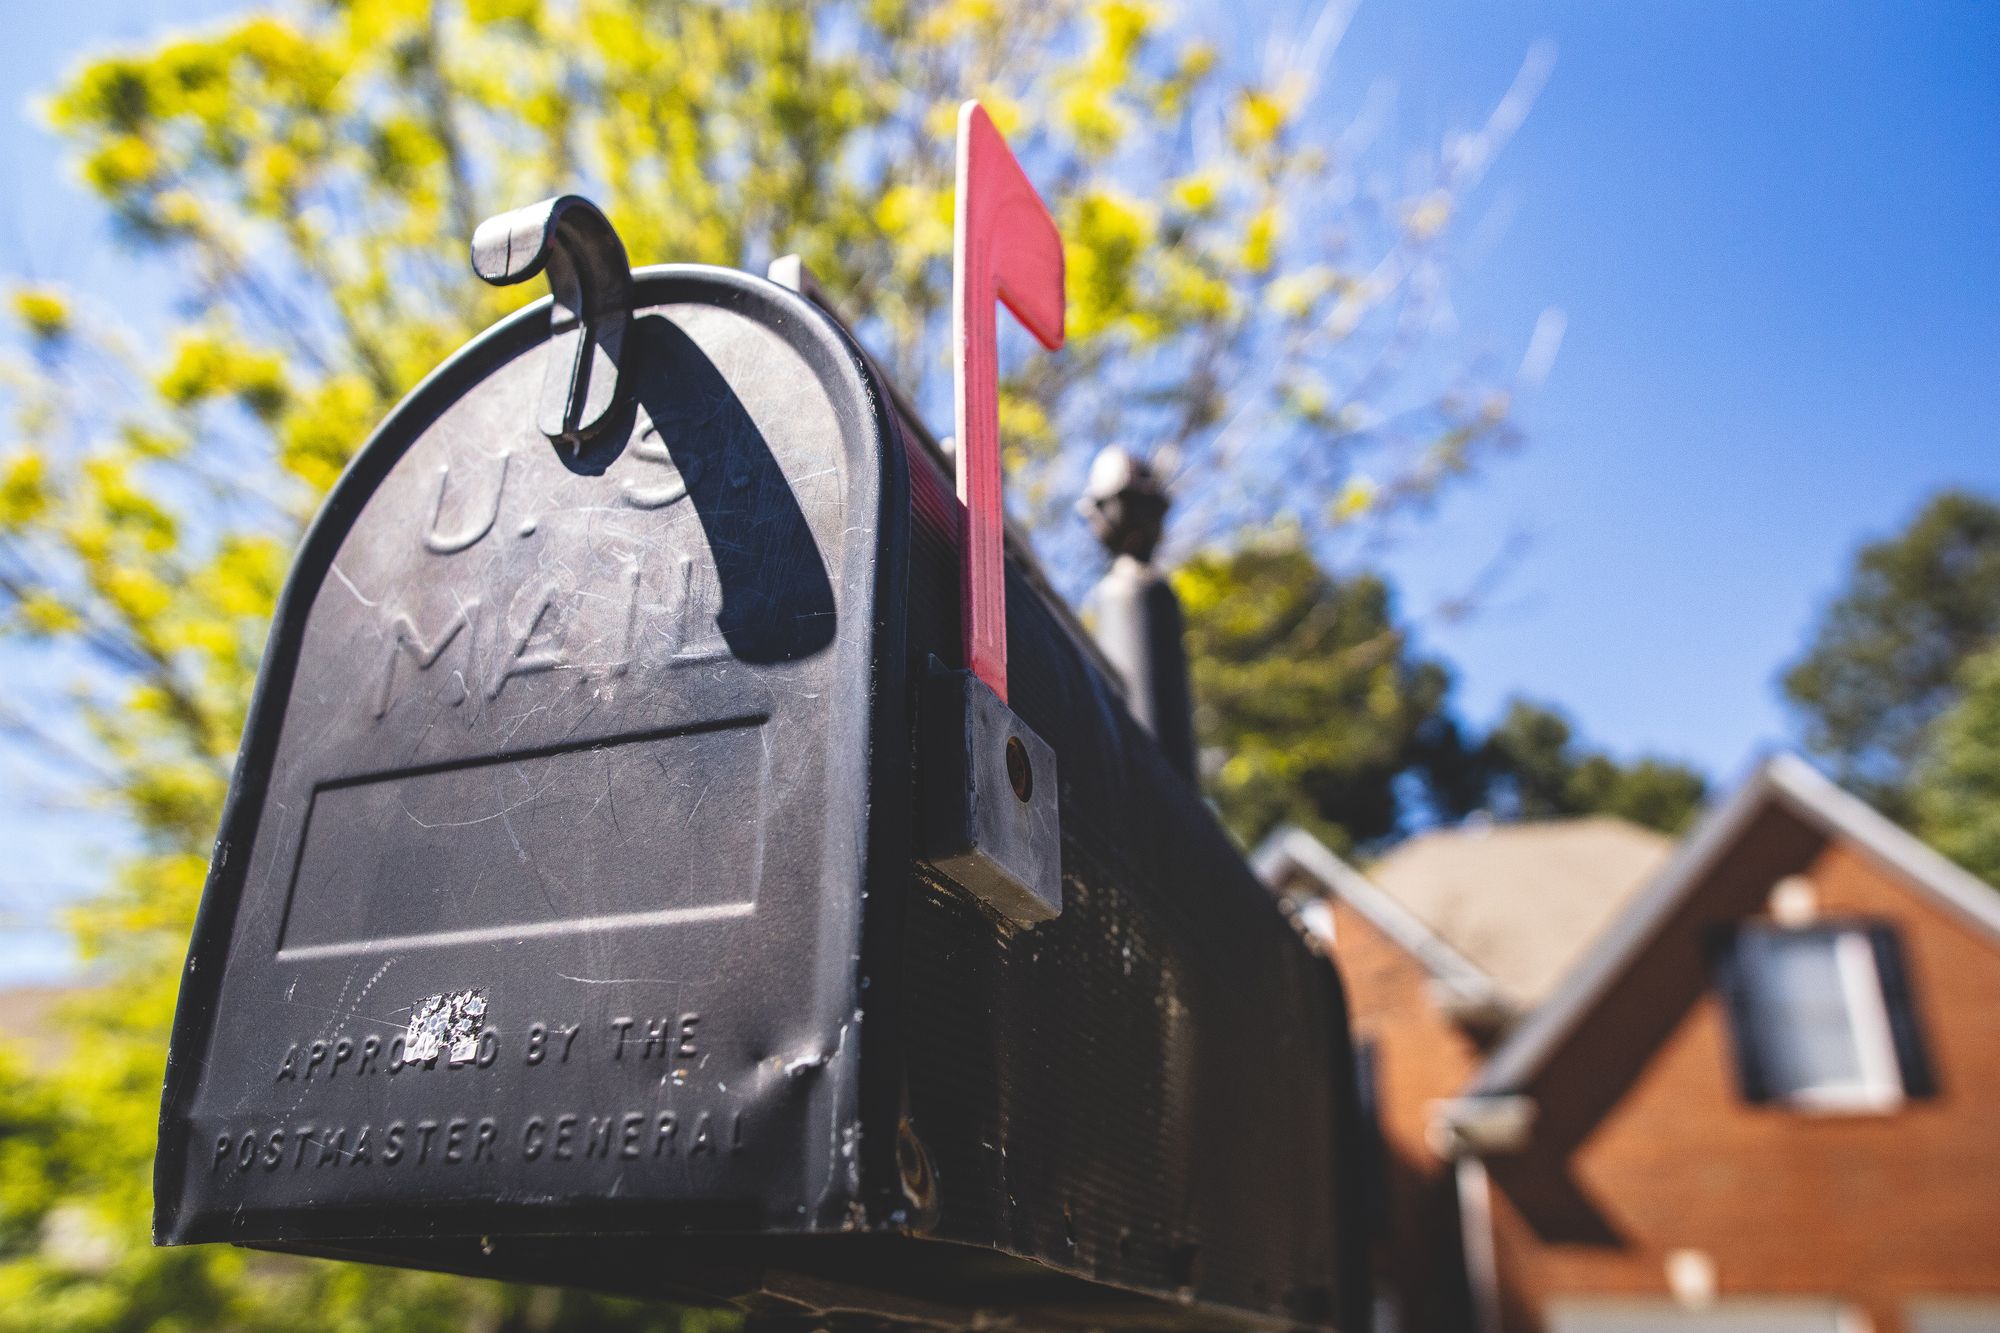 Get To Know Invelo: Direct Mail Marketing